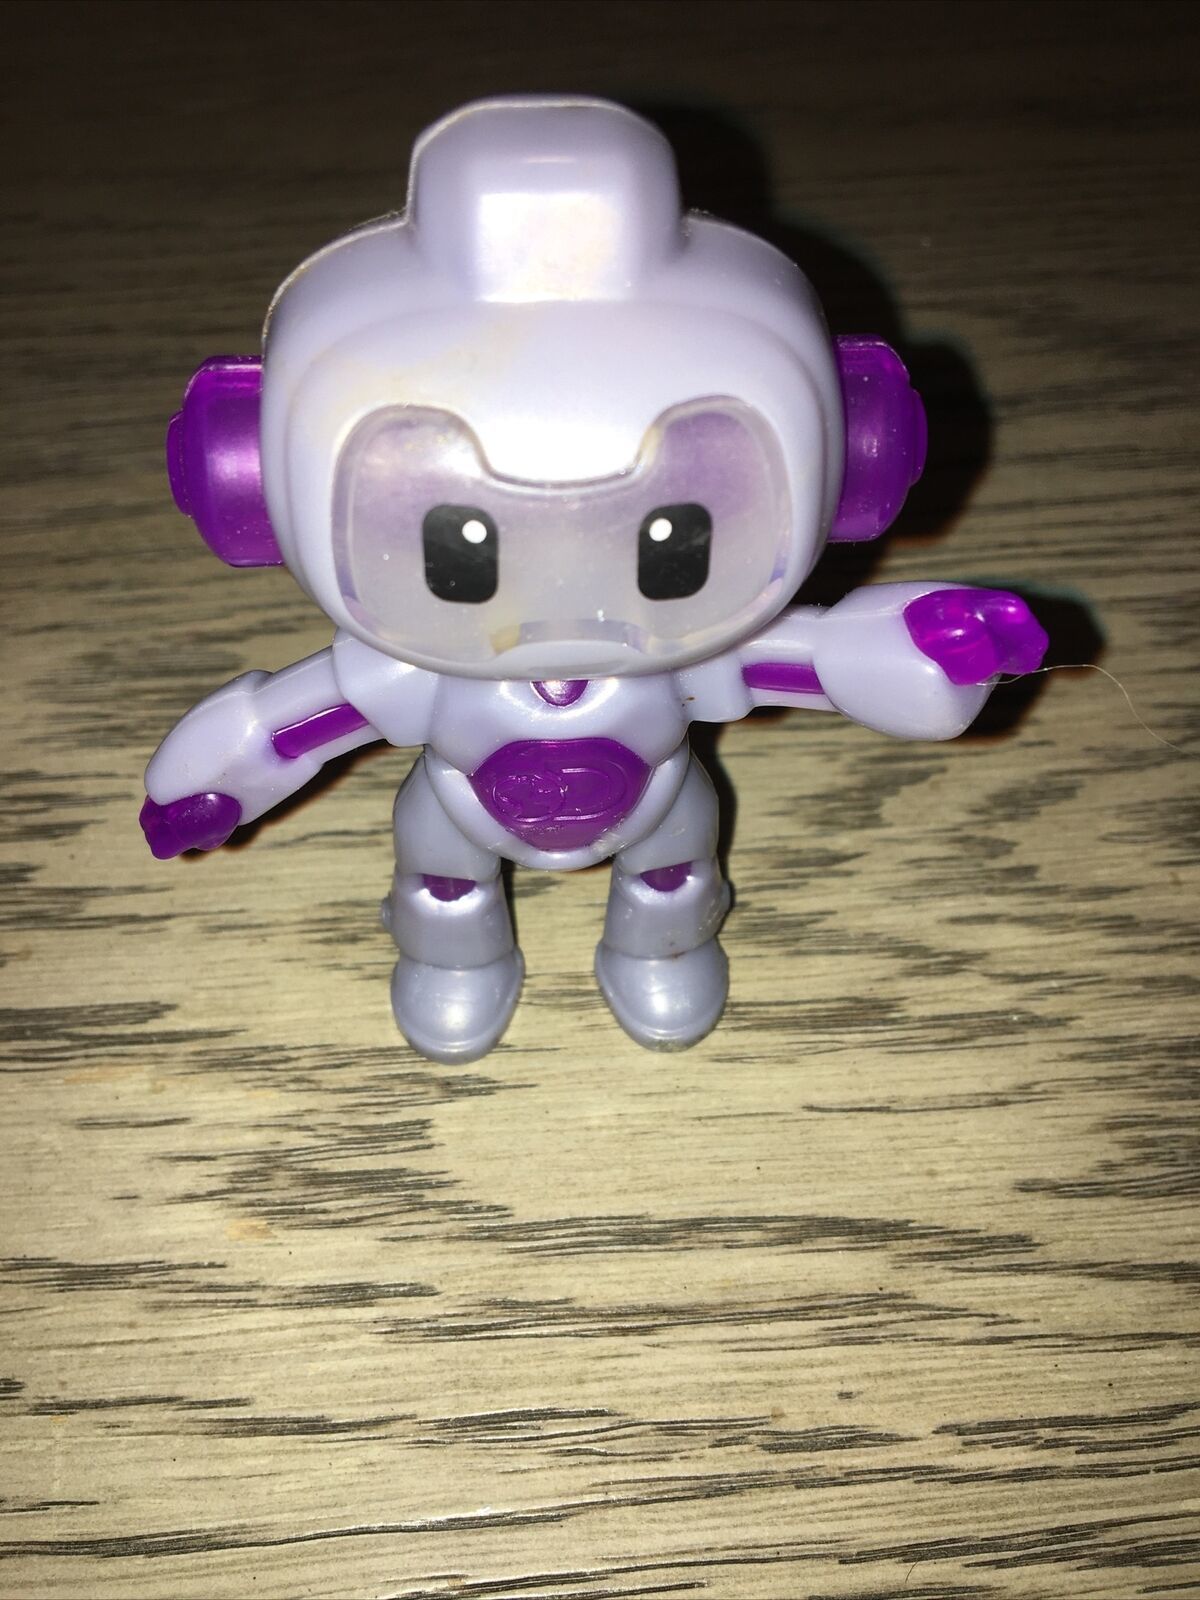 BLUE McDONALD's 2020 DISCOVERY MINDBLOWN HAPPY MEAL TOY #2 PRISM BOT